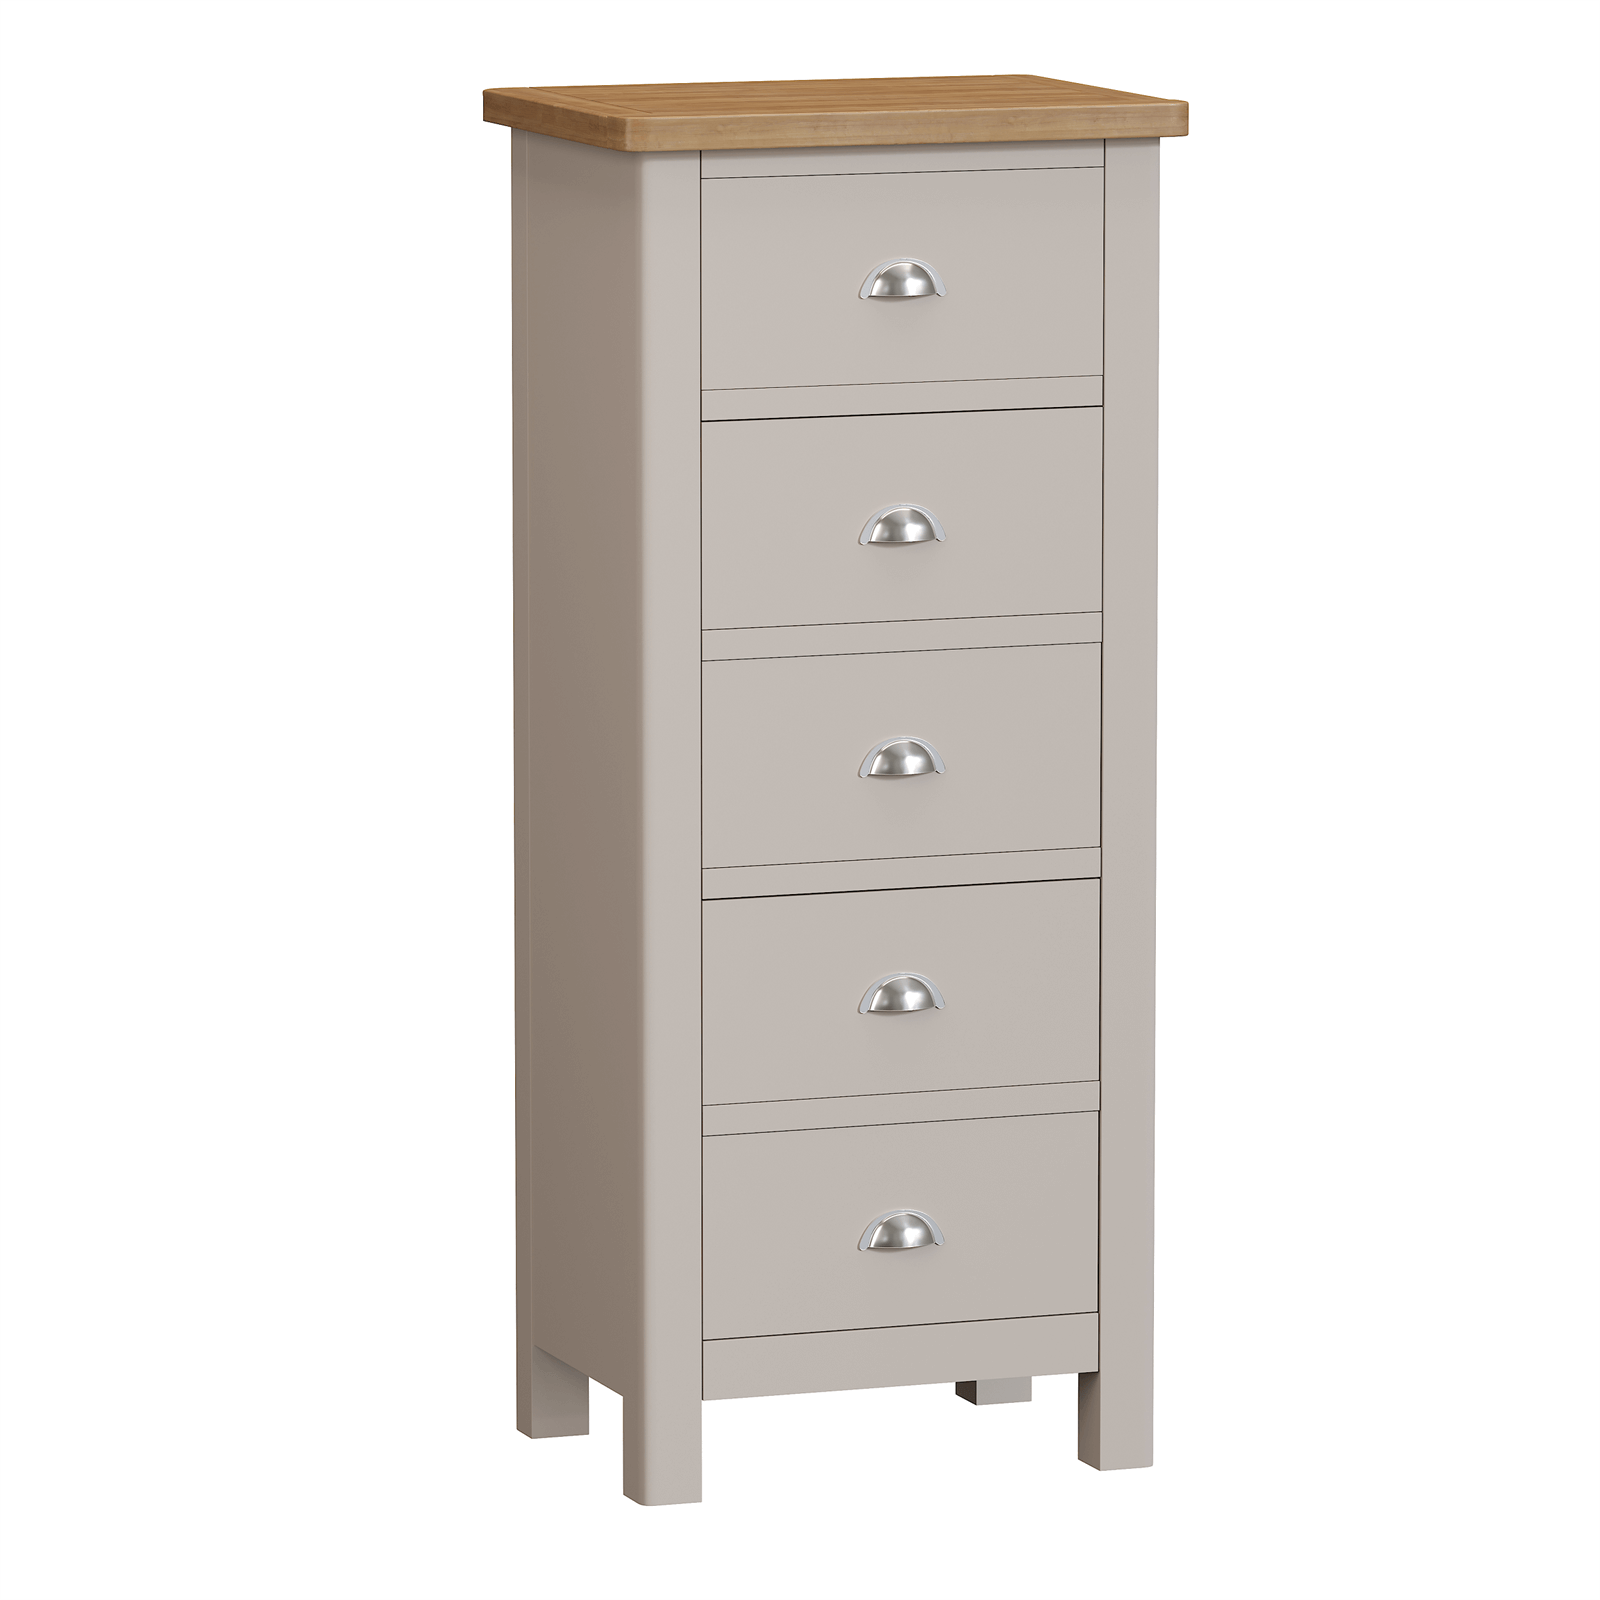 Padstow 5 Drawer Narrow Chest of Drawers - Truffle